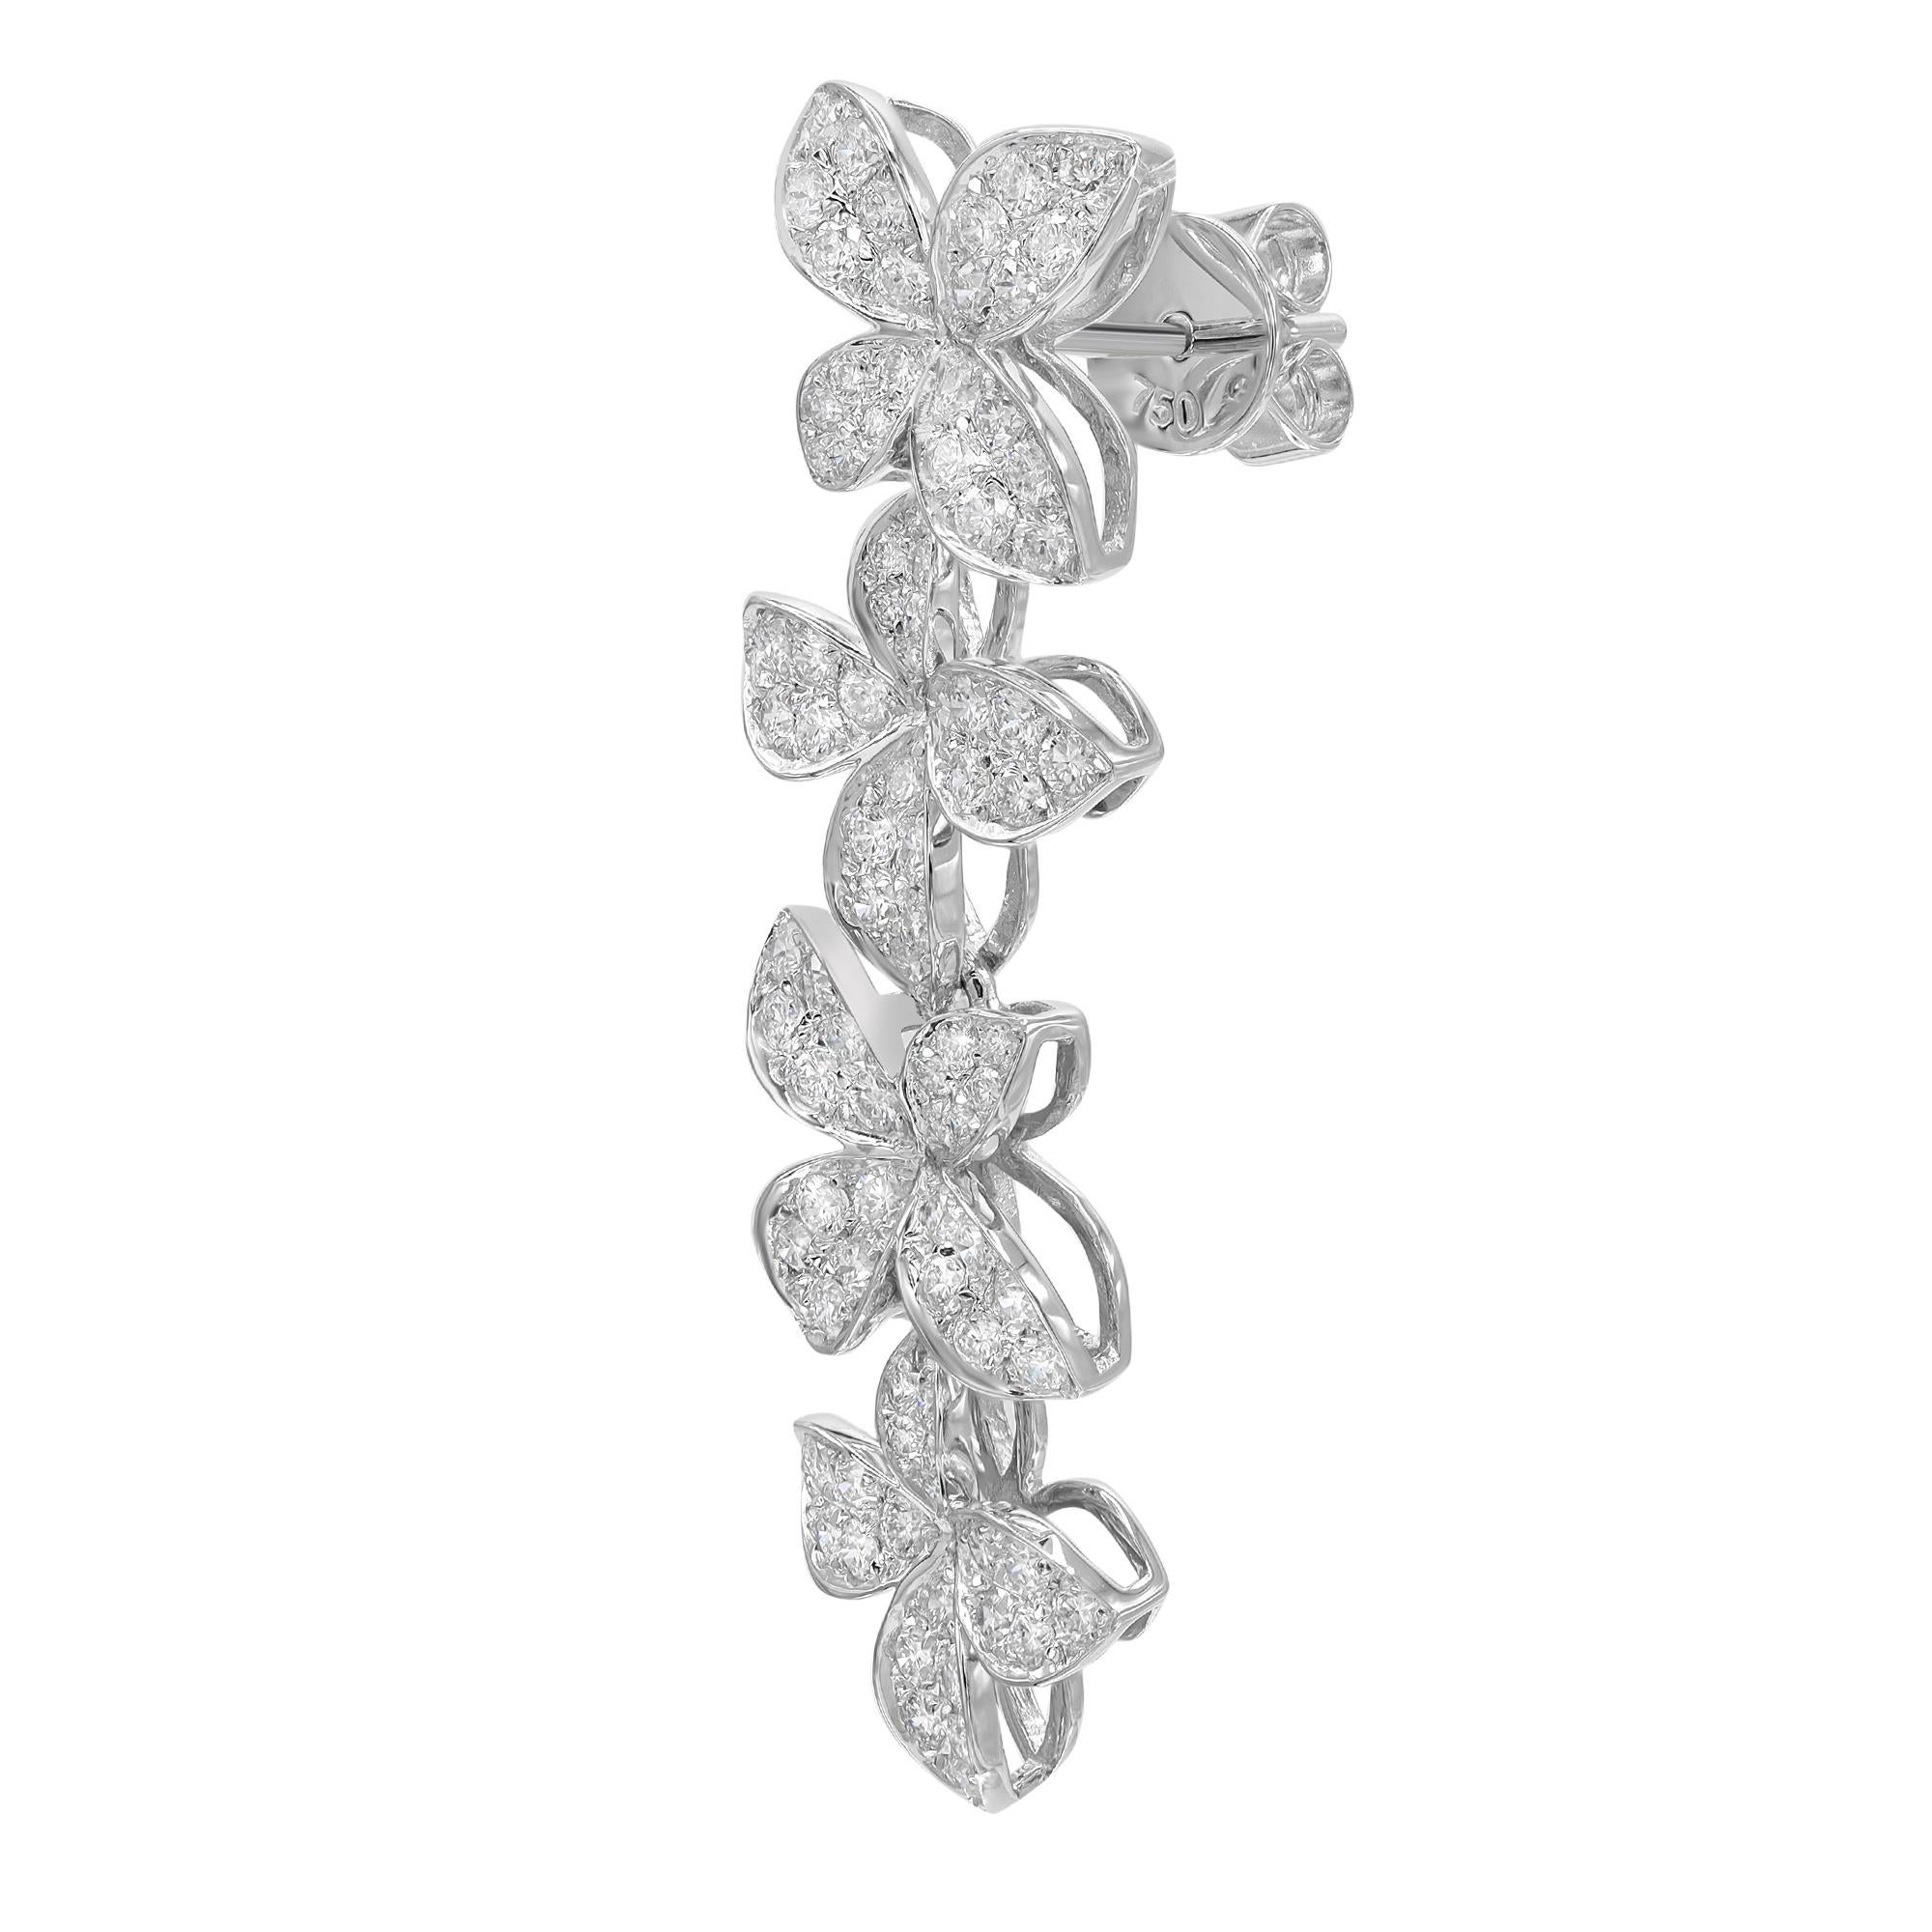 Pave Set Round Cut Diamond Flower Drop Earrings 18K White Gold 1.91Cttw In New Condition For Sale In New York, NY